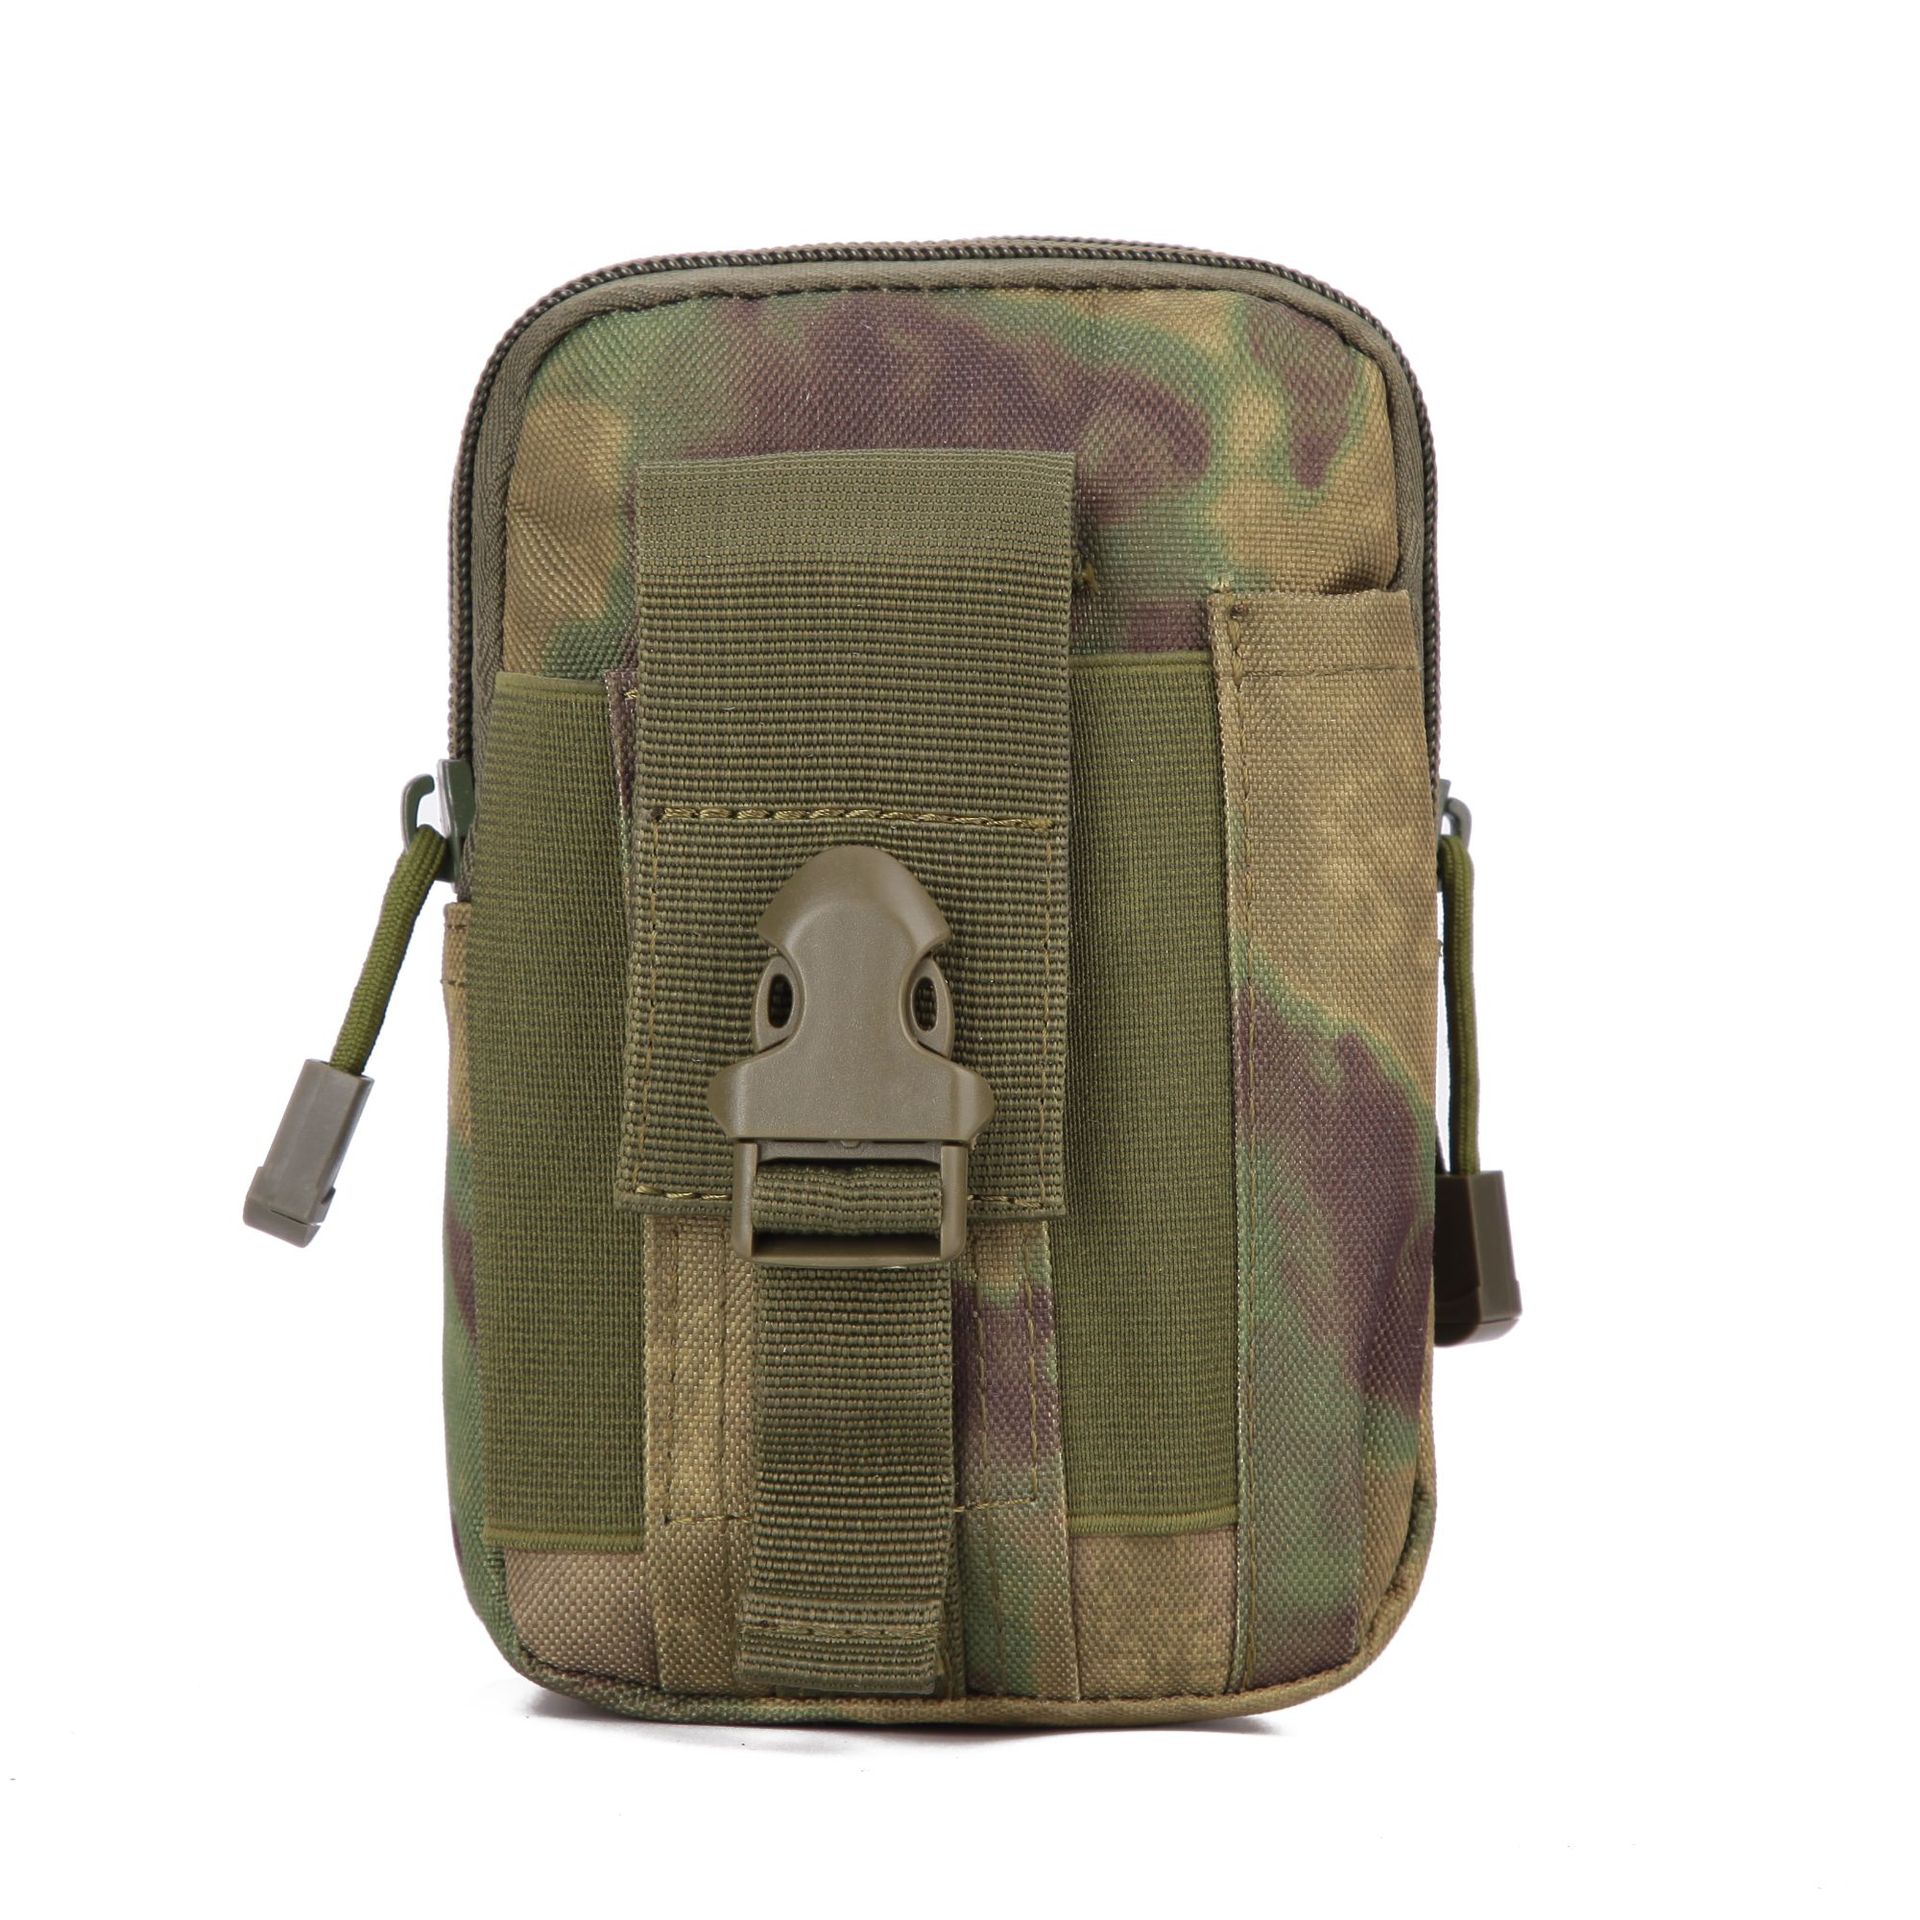 Military Fans Camouflage Tactics Waist Bag Pannier Bag Outdoor Sports Multi-Functional Work Waist Bag Construction Site Camouflage Belt Bag Customization